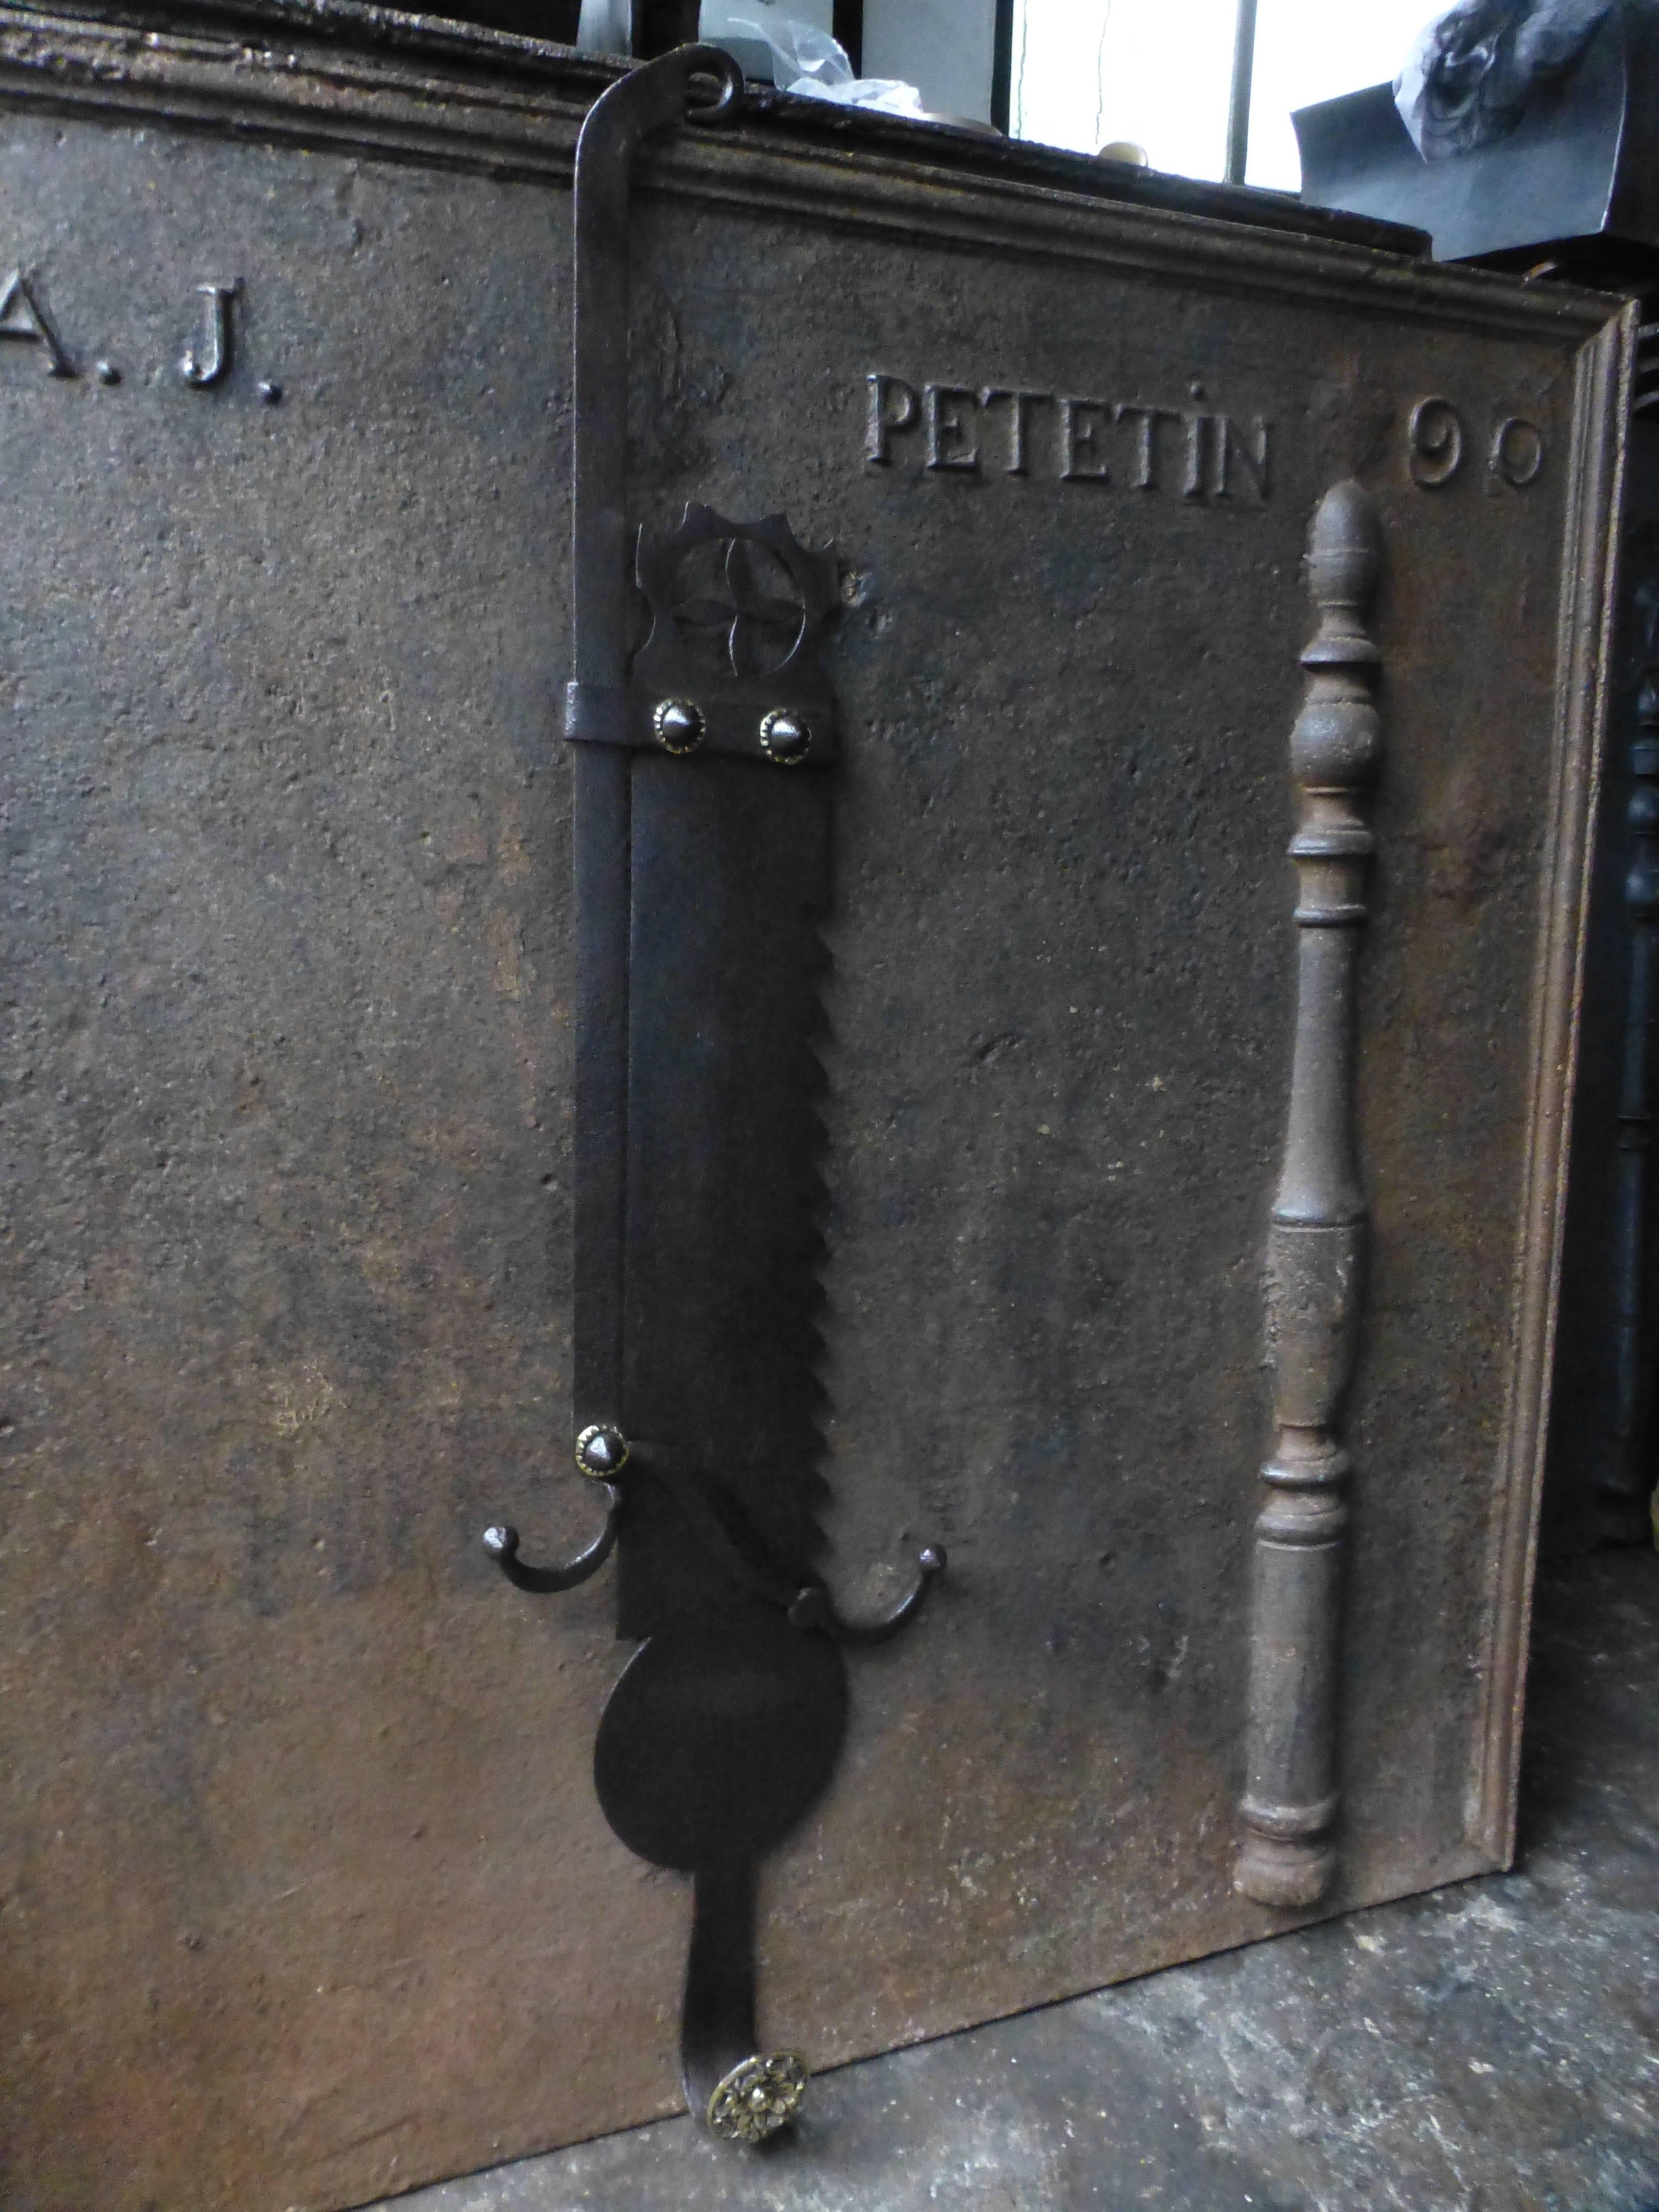 17th-18th century French fireplace trammel made of wrought iron and polished brass. 

The trammel was used for cooking to regulate the distance between pot and fire. The height is the length of the saw.